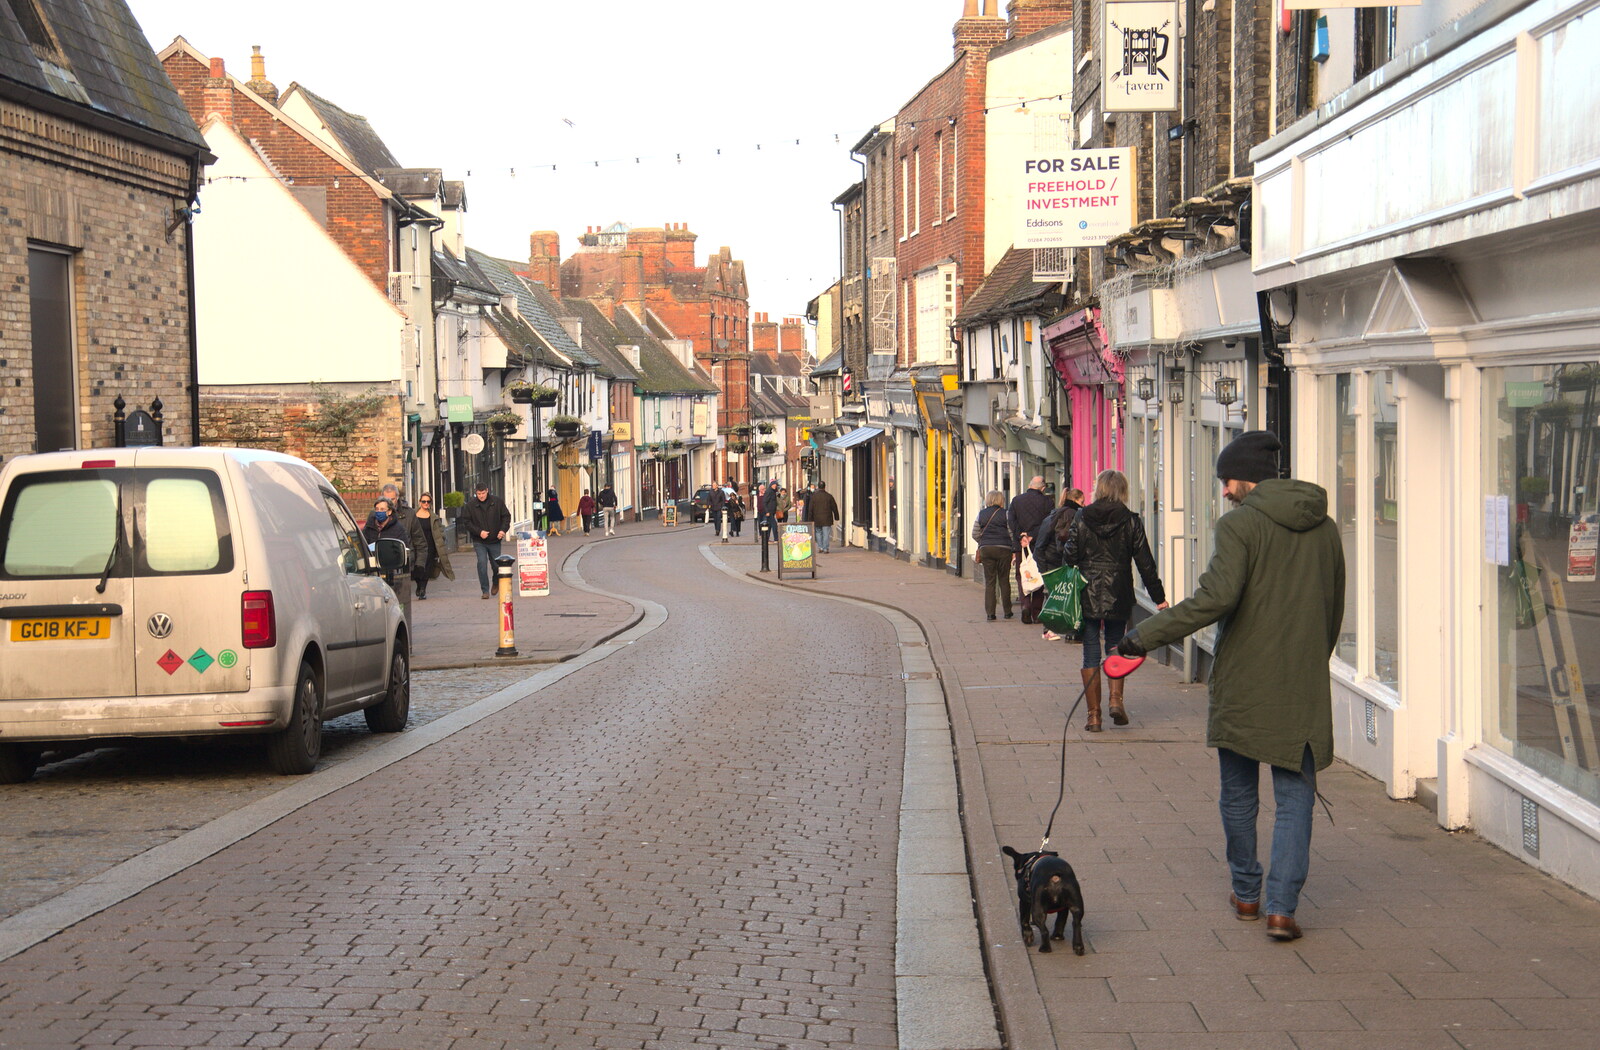 St. John's Street from A Few Hours in Bury St. Edmunds, Suffolk - 3rd January 2022